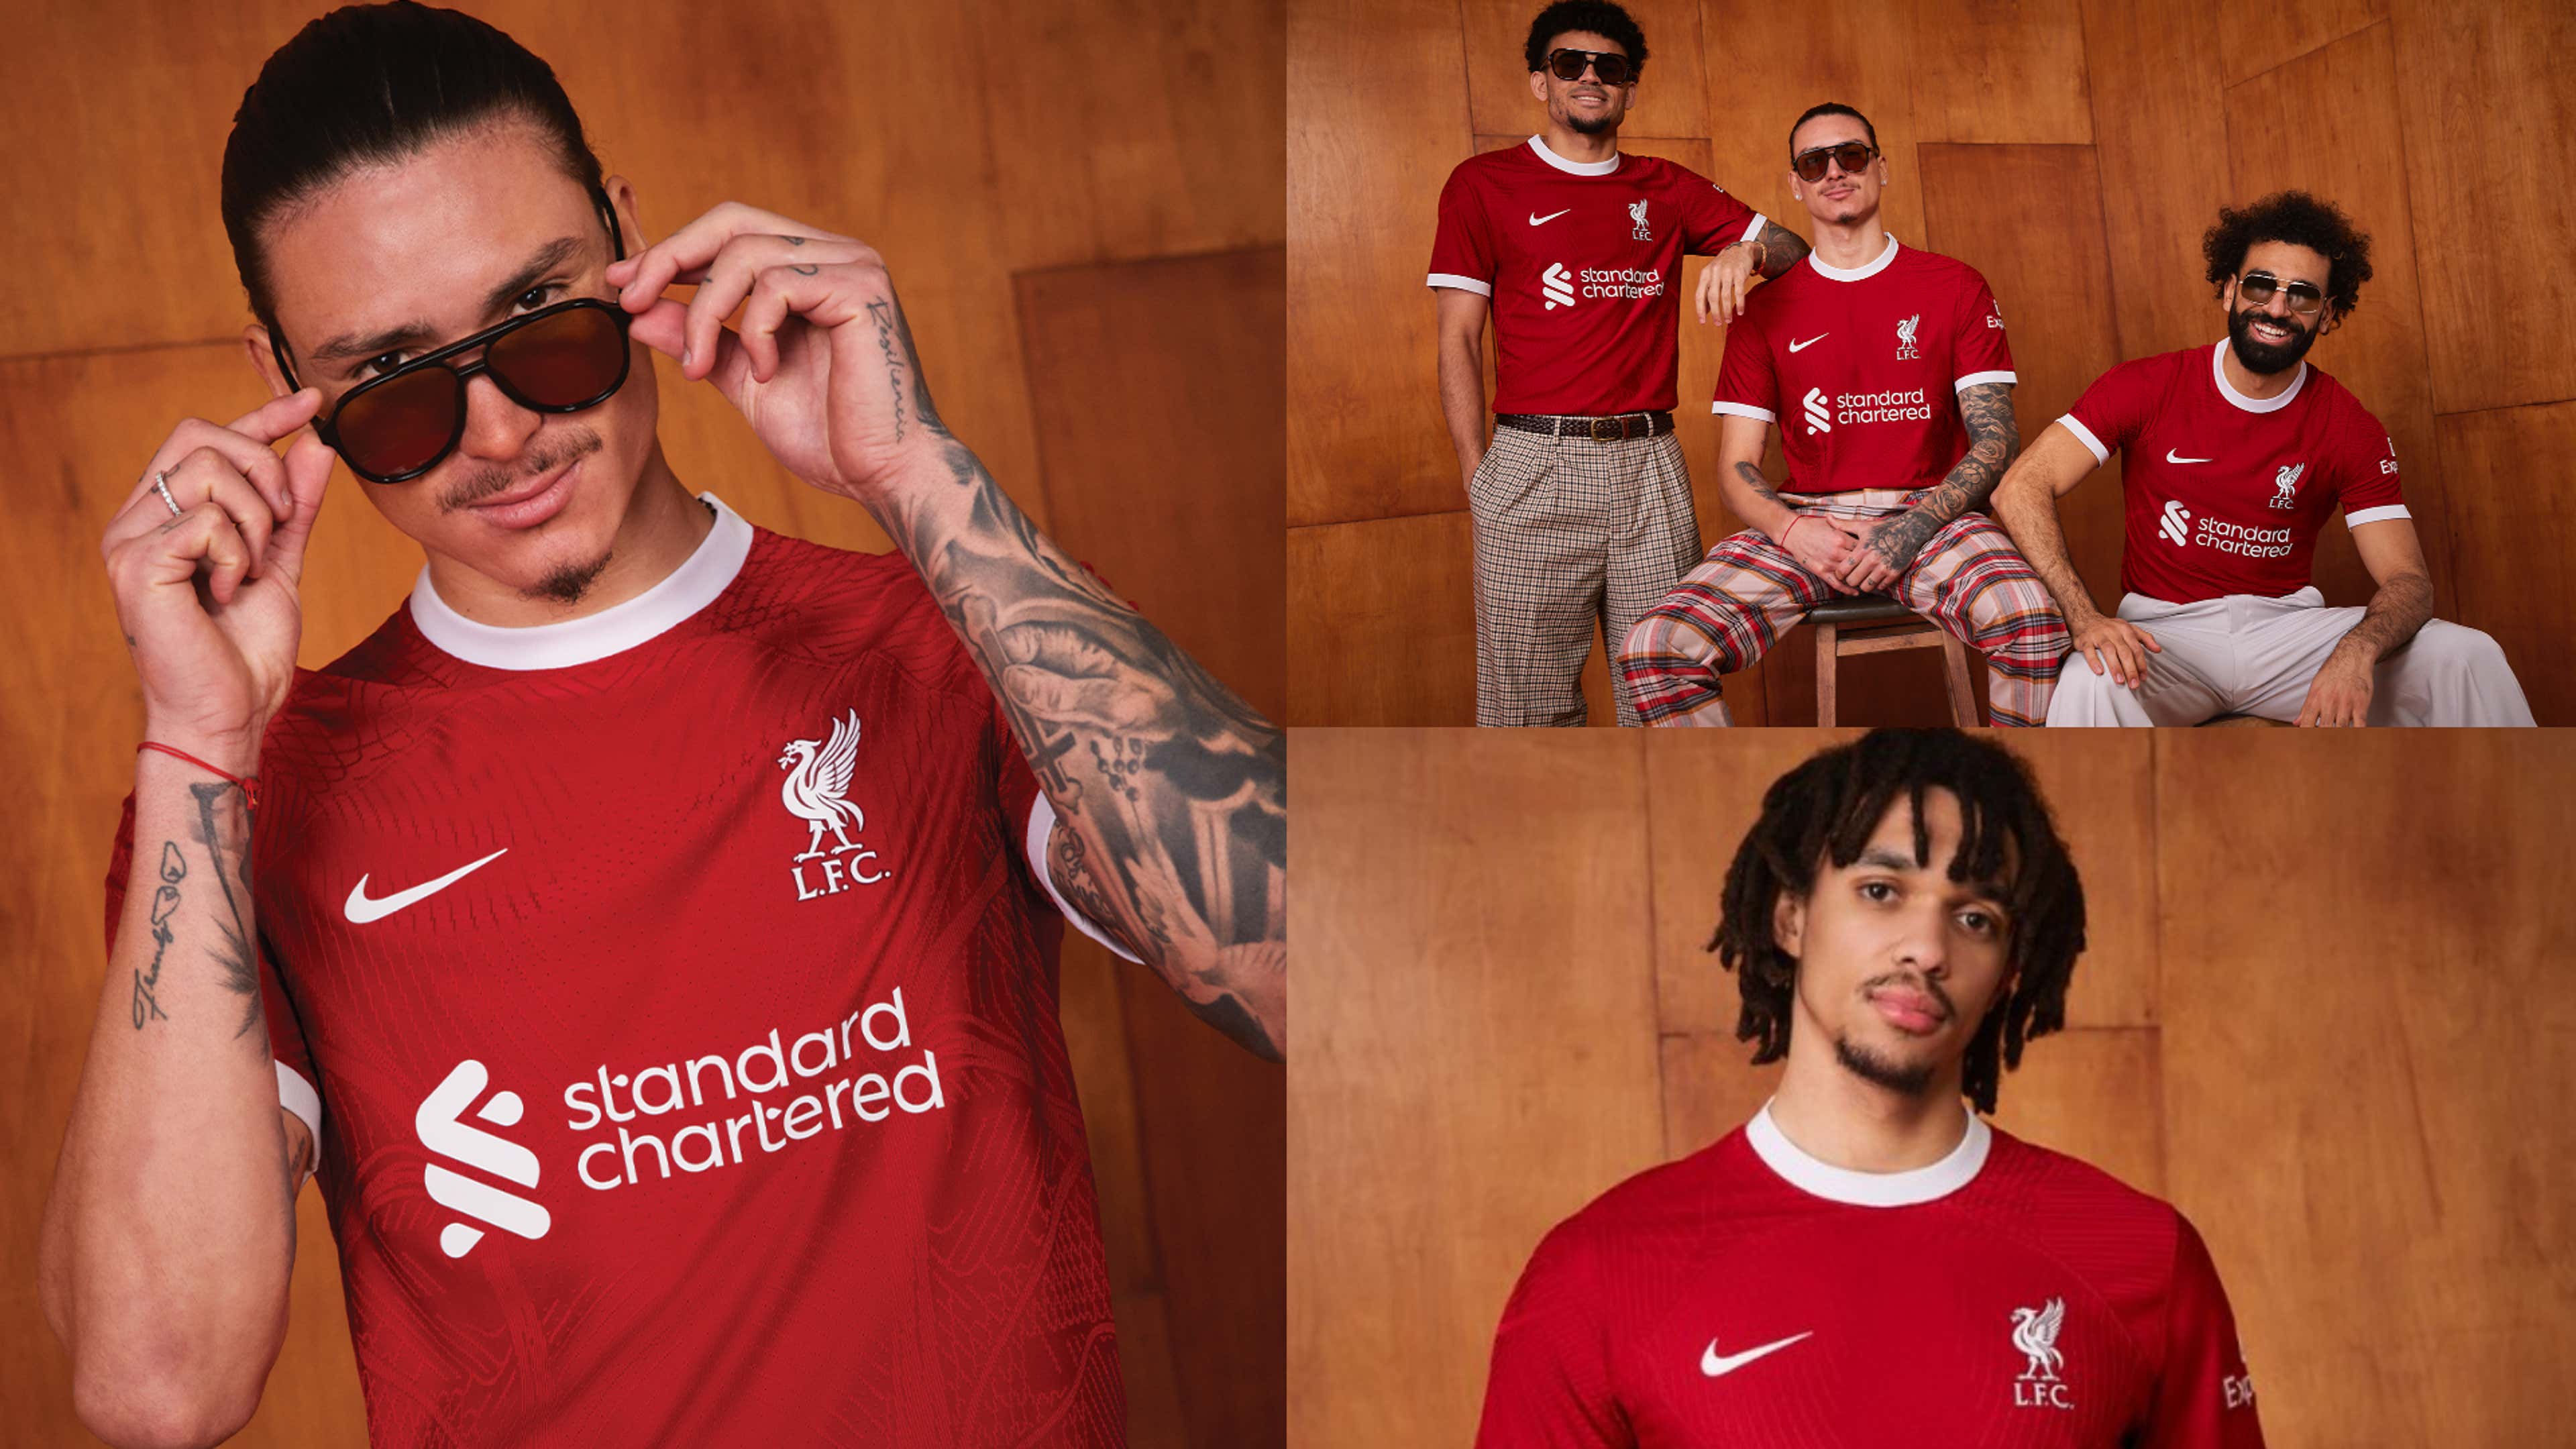 Liverpool launches new Champions League kit with one special - oggsync.com